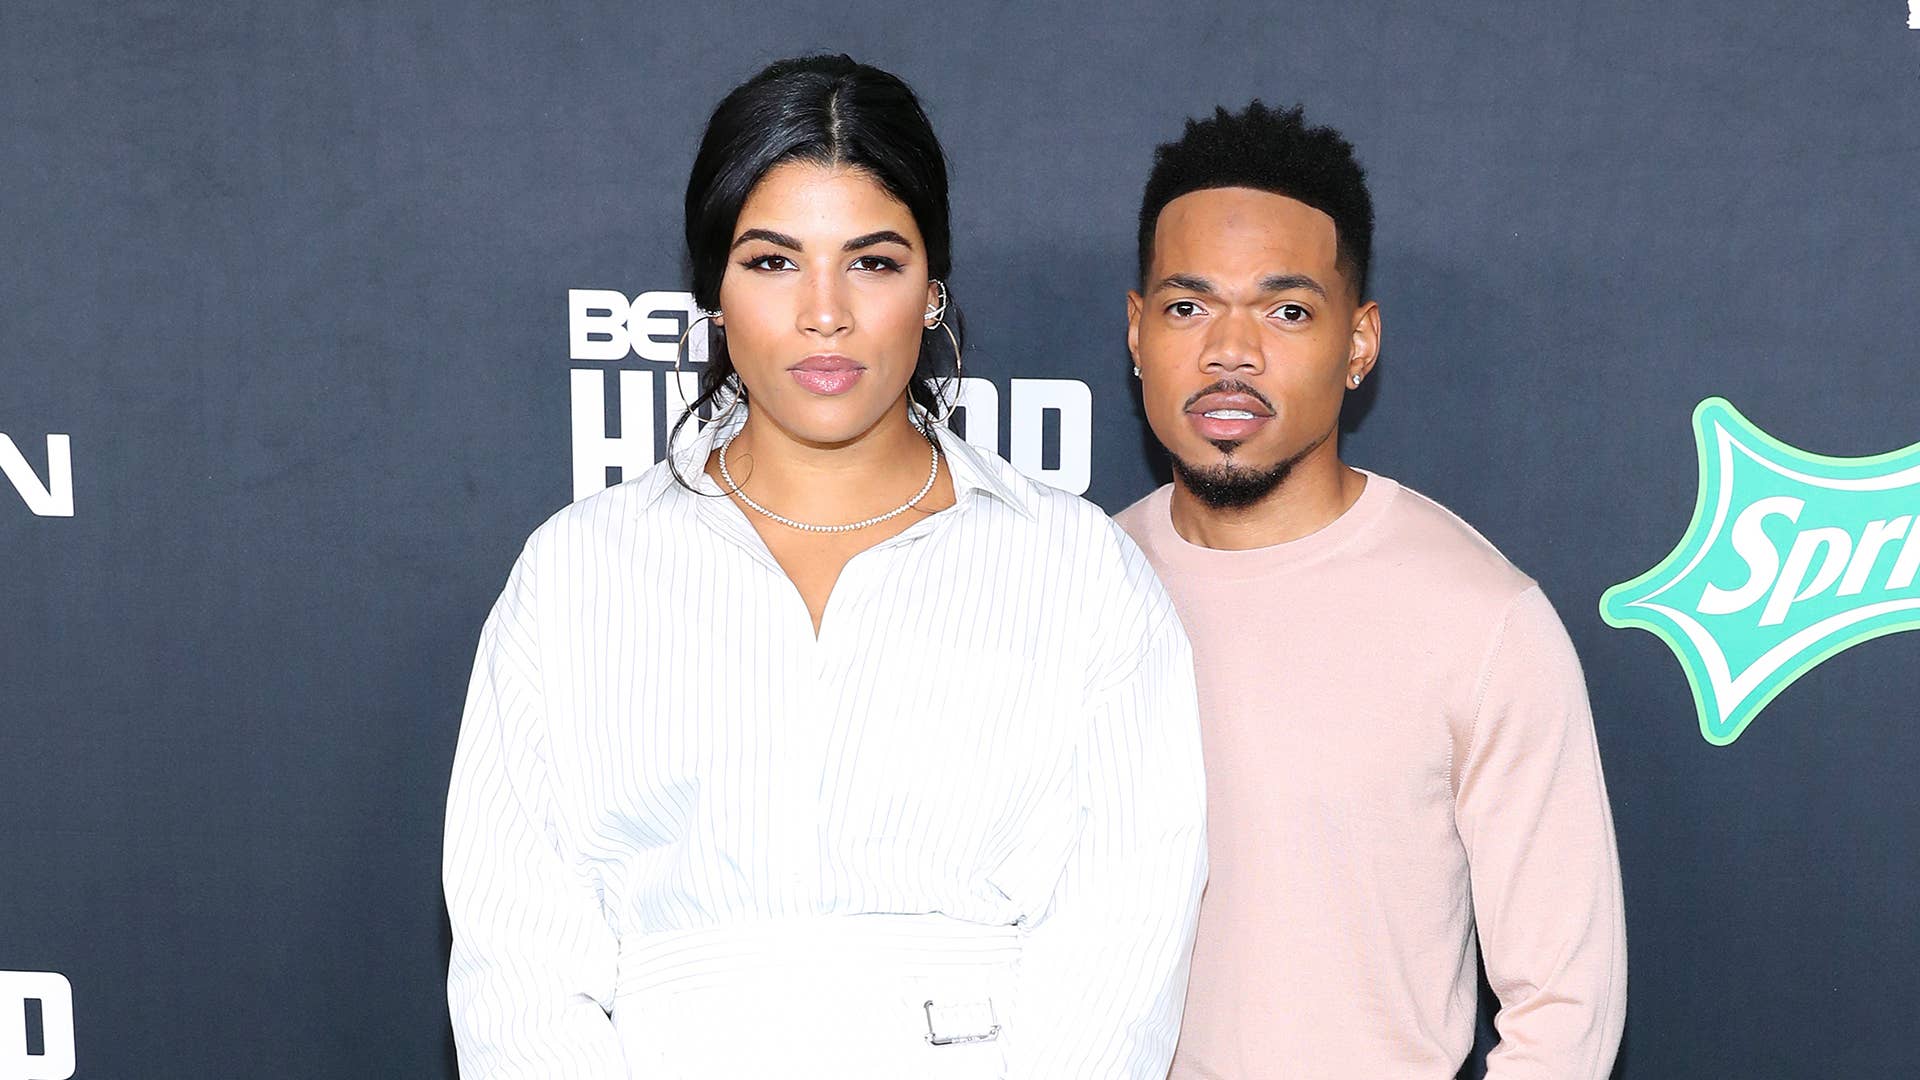 Kirsten Corley and Chance the Rapper attend the BET Hip Hop Awards 2019